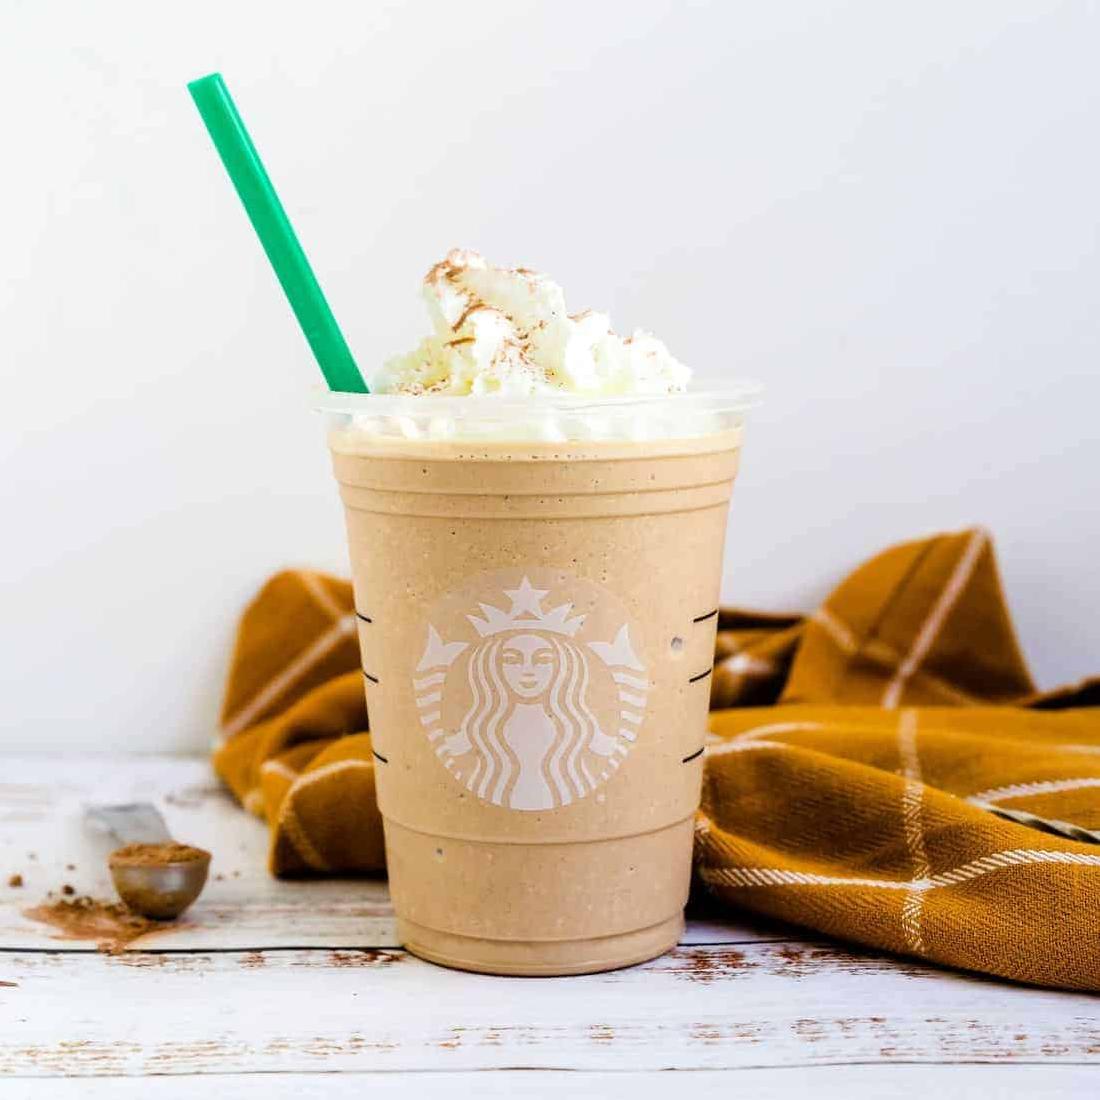  You don't have to be a barista to make this cool, creamy beverage.